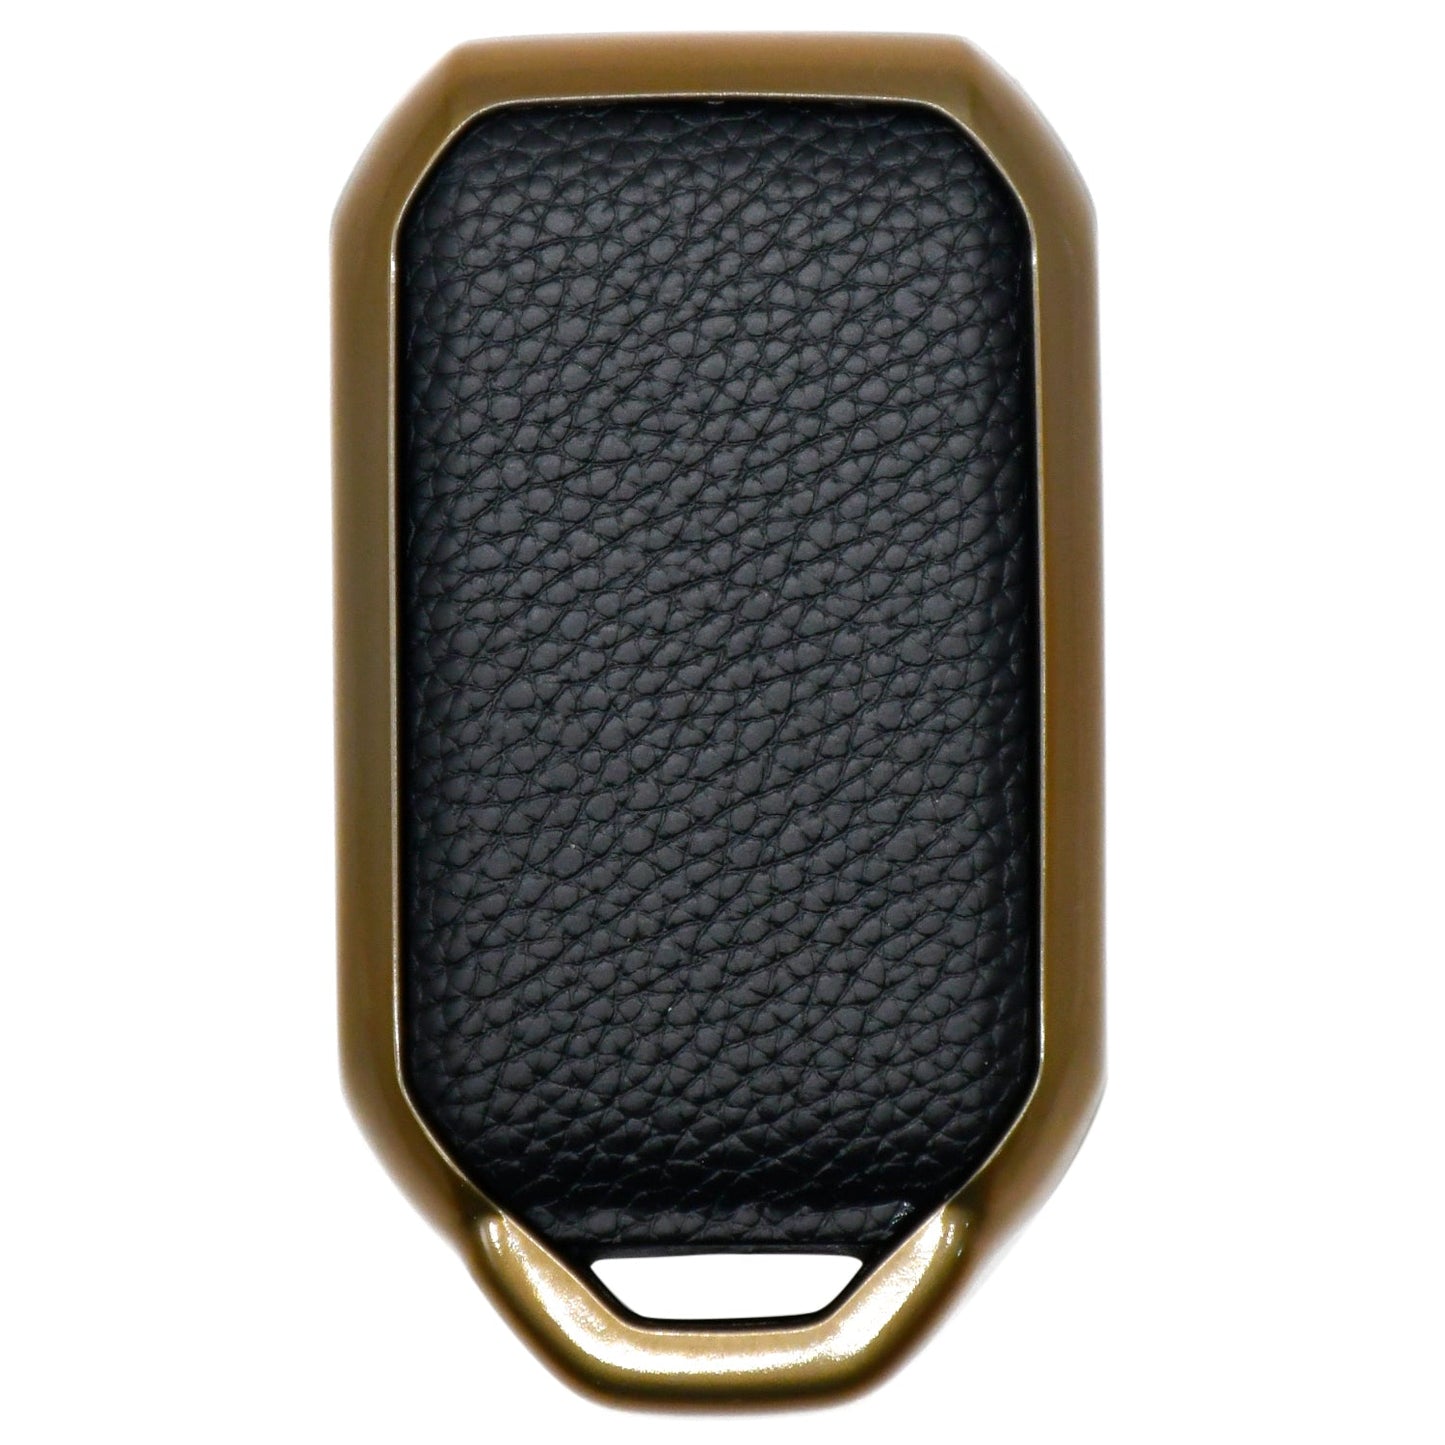 
                  
                    KMH Leather Key Cover for Suzuki(D2)-Gold/Black (Pack of 2)-TPU GOLD KEY COVER-KMH-CARPLUS
                  
                